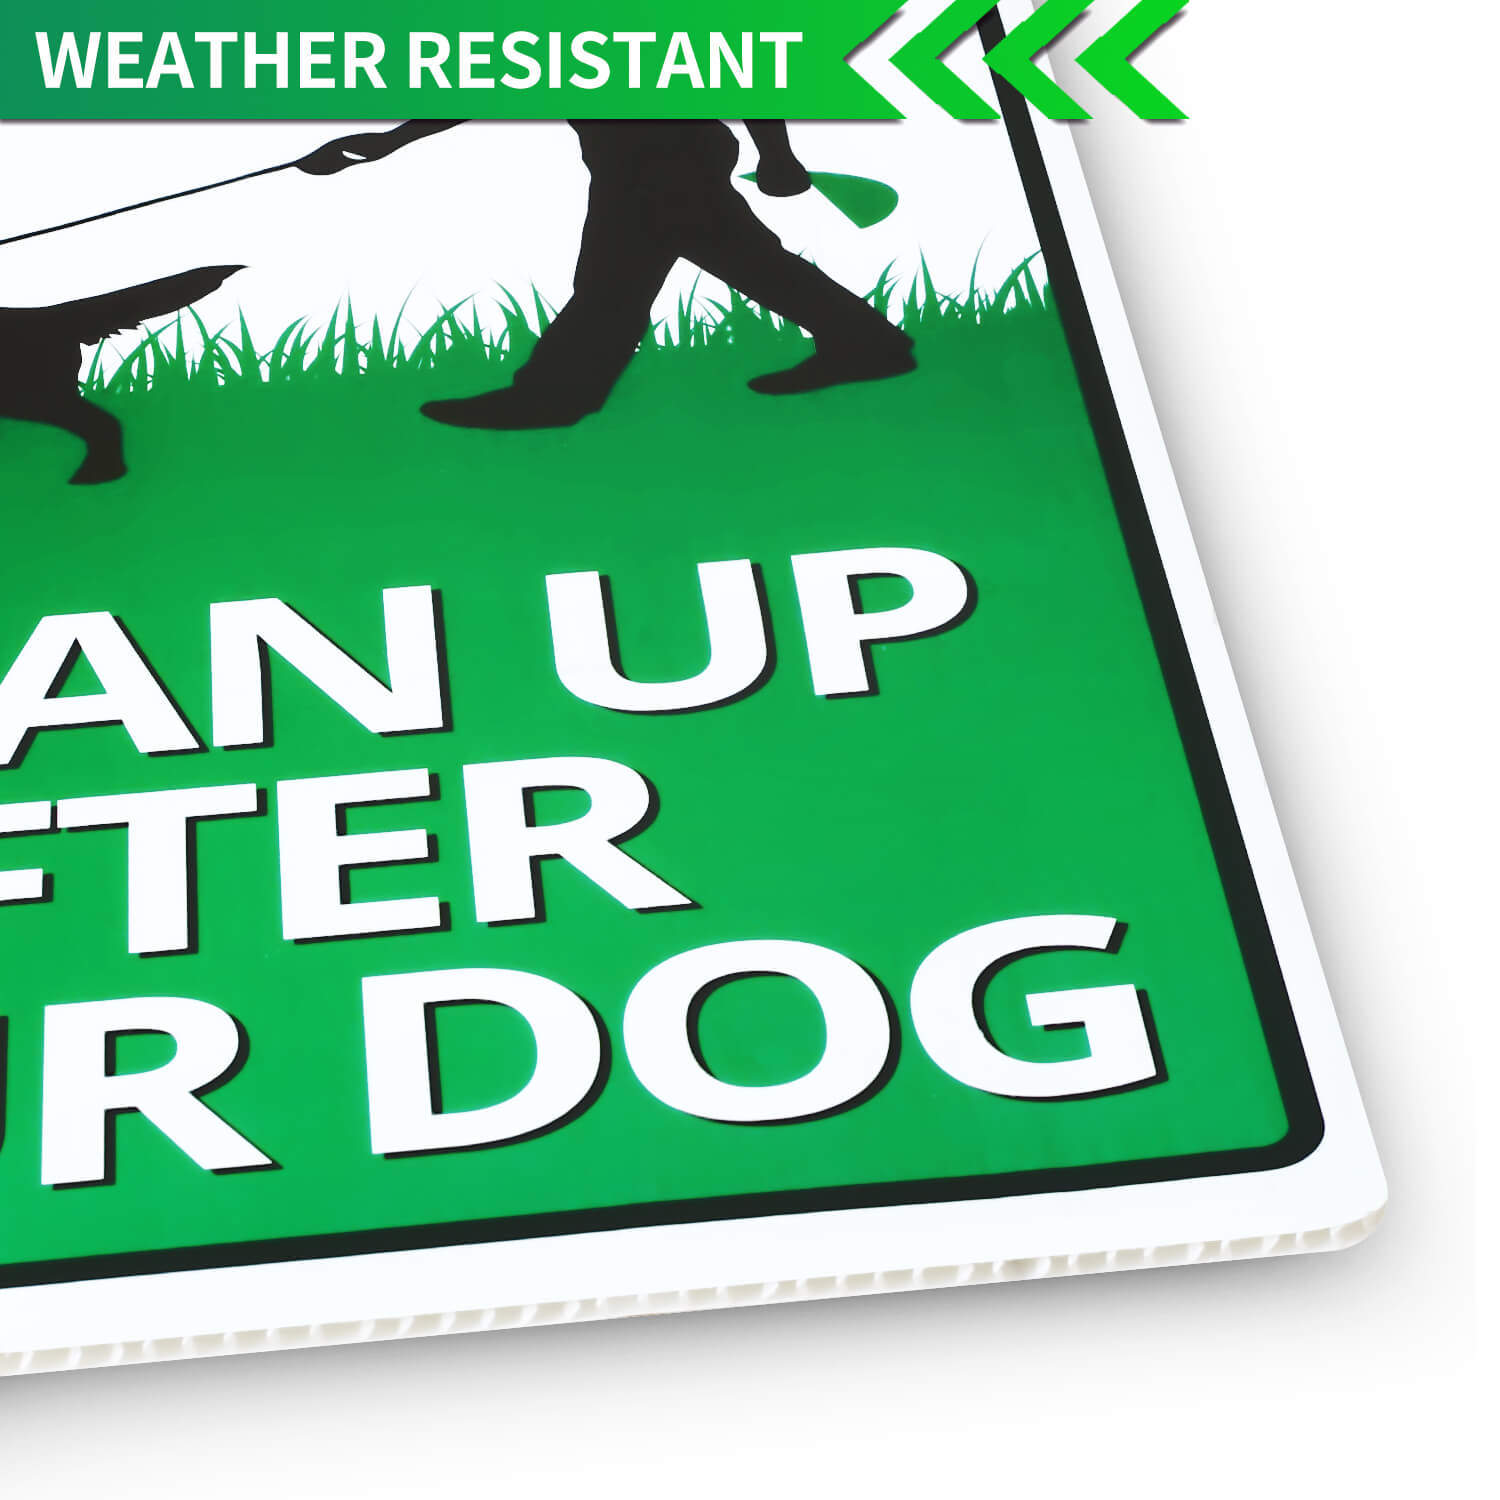 Clean Up After Your Dog Sign, Double Sided with Metal Wire H-Stakes Stands Corrugated Plastic Non-fading 12 x 9 Clean Up After Your Pets Sign Waterproof Easy to Mount Weather Resistant 2 Pack